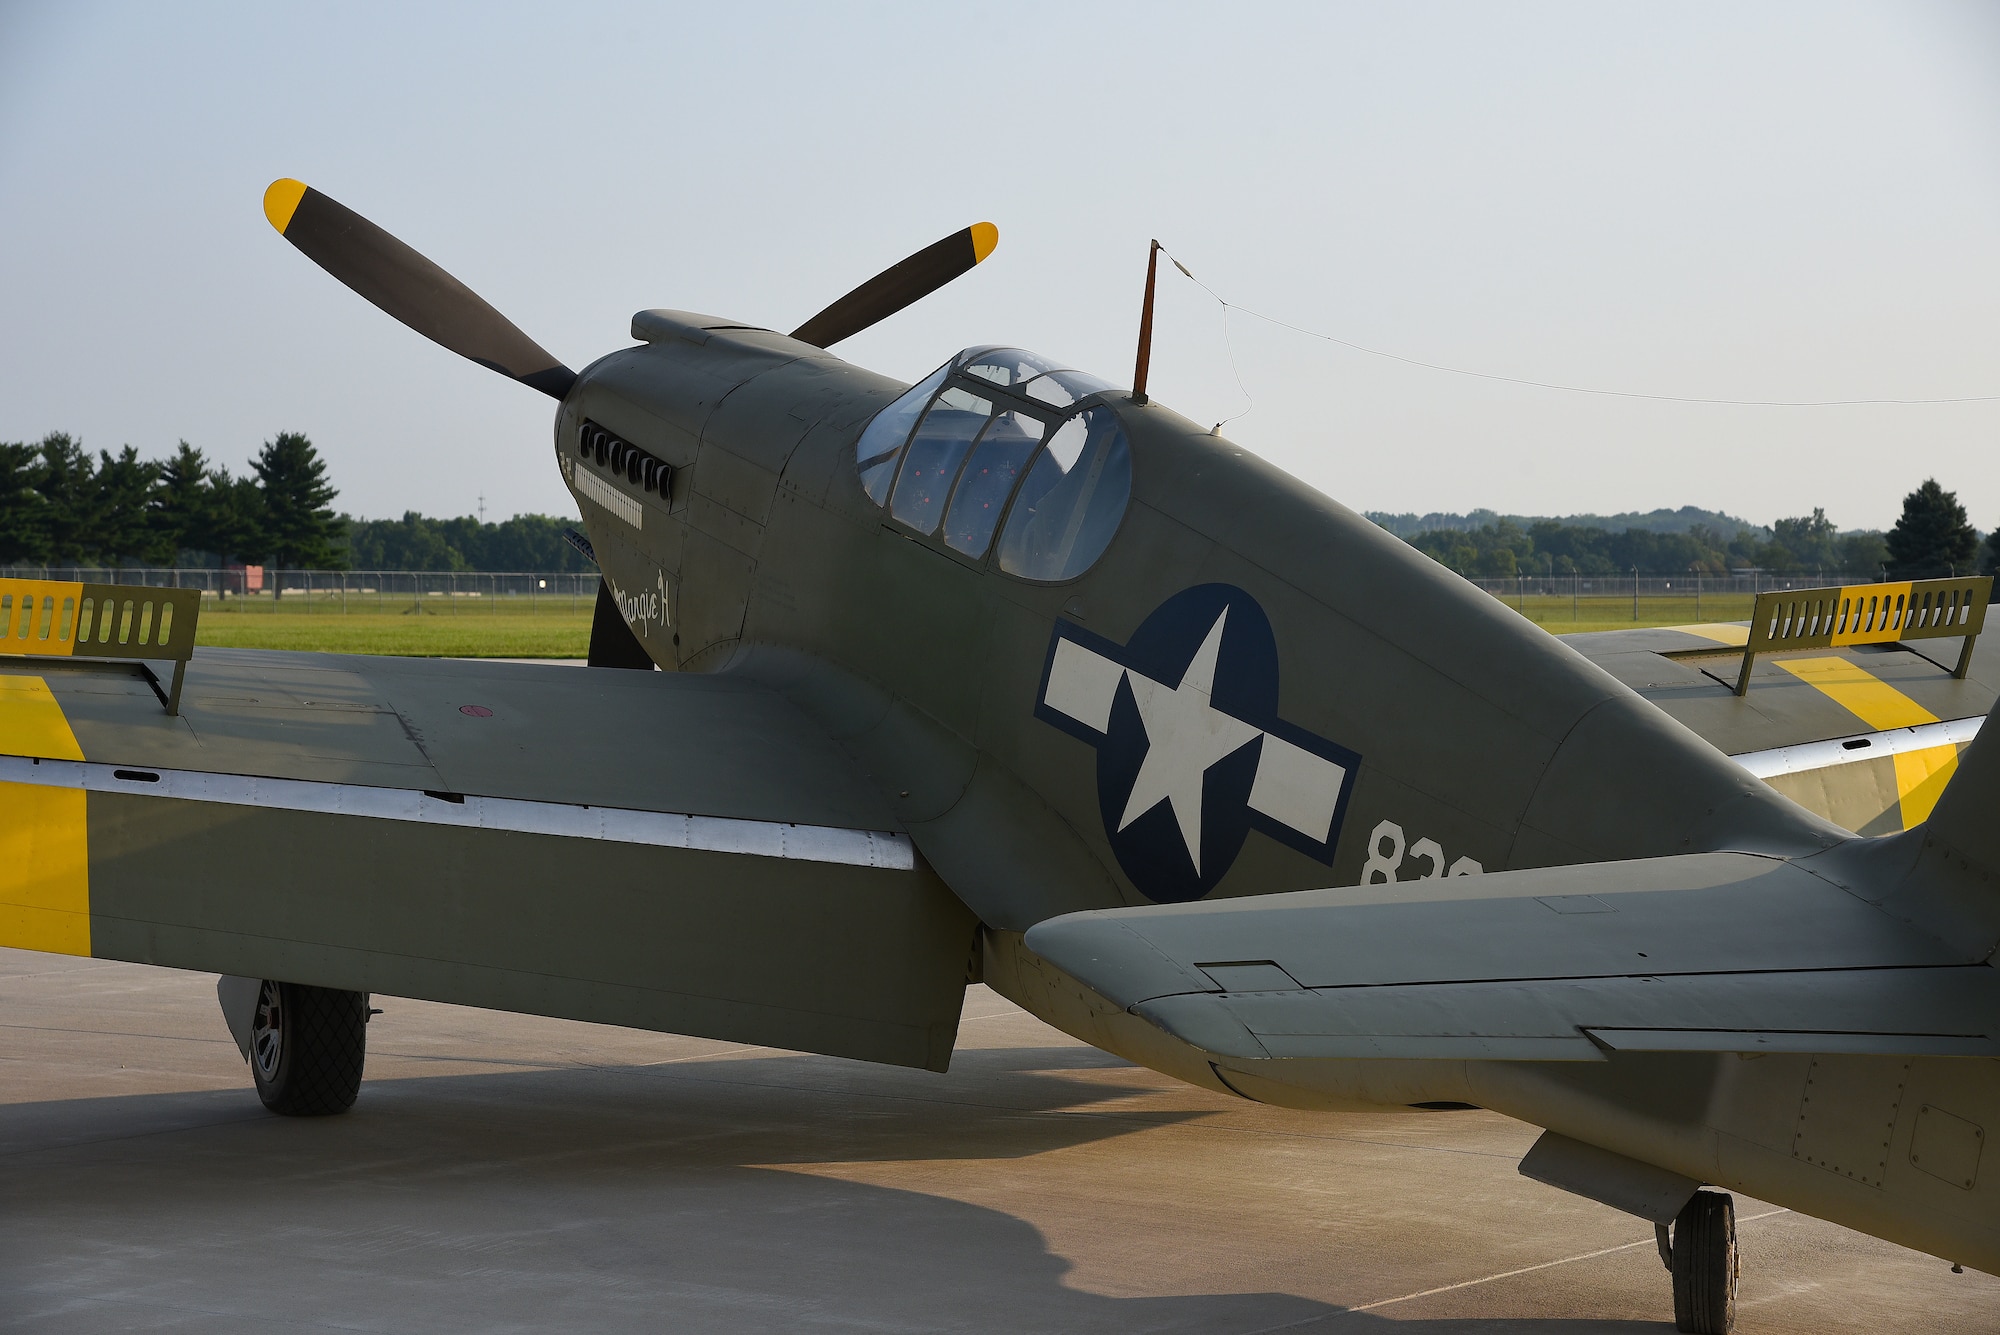 A view of the North American A-36A Mustang before restoration crews at the National Museum of the U.S. Air Force moved the aircraft into the WWII Gallery on Aug. 13, 2018. Several WWII era aircraft on display were temporarily placed throughout the museum to provide adequate space for the Memphis Belle exhibit opening events. (U.S. Air Force photo by Ken LaRock)